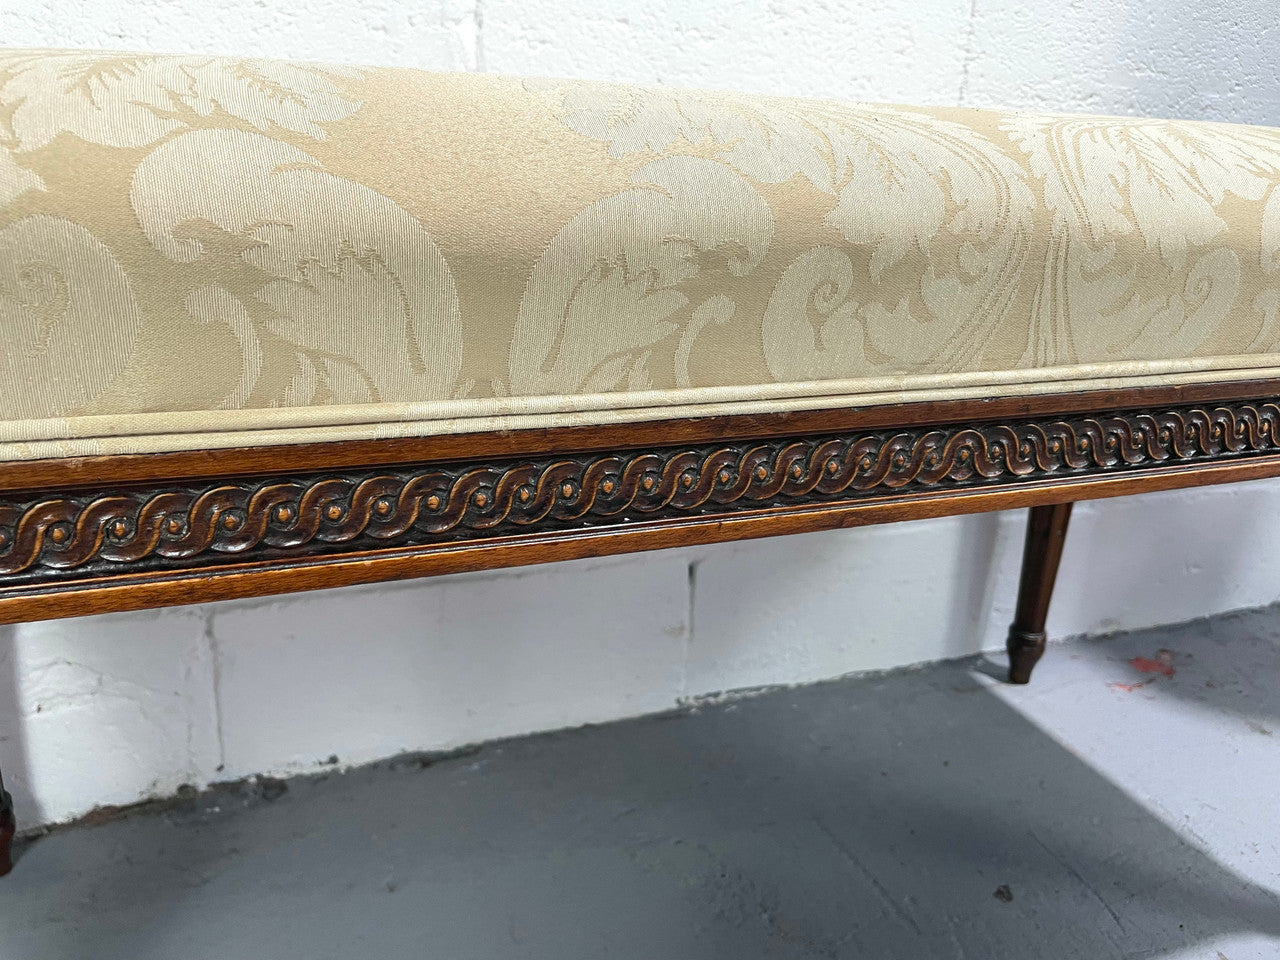 Nicely carved French Louis XVI style Walnut upholstered stool. The stool is in good condition and the frabic is in good used condition, please view photos as they help form part of the description.